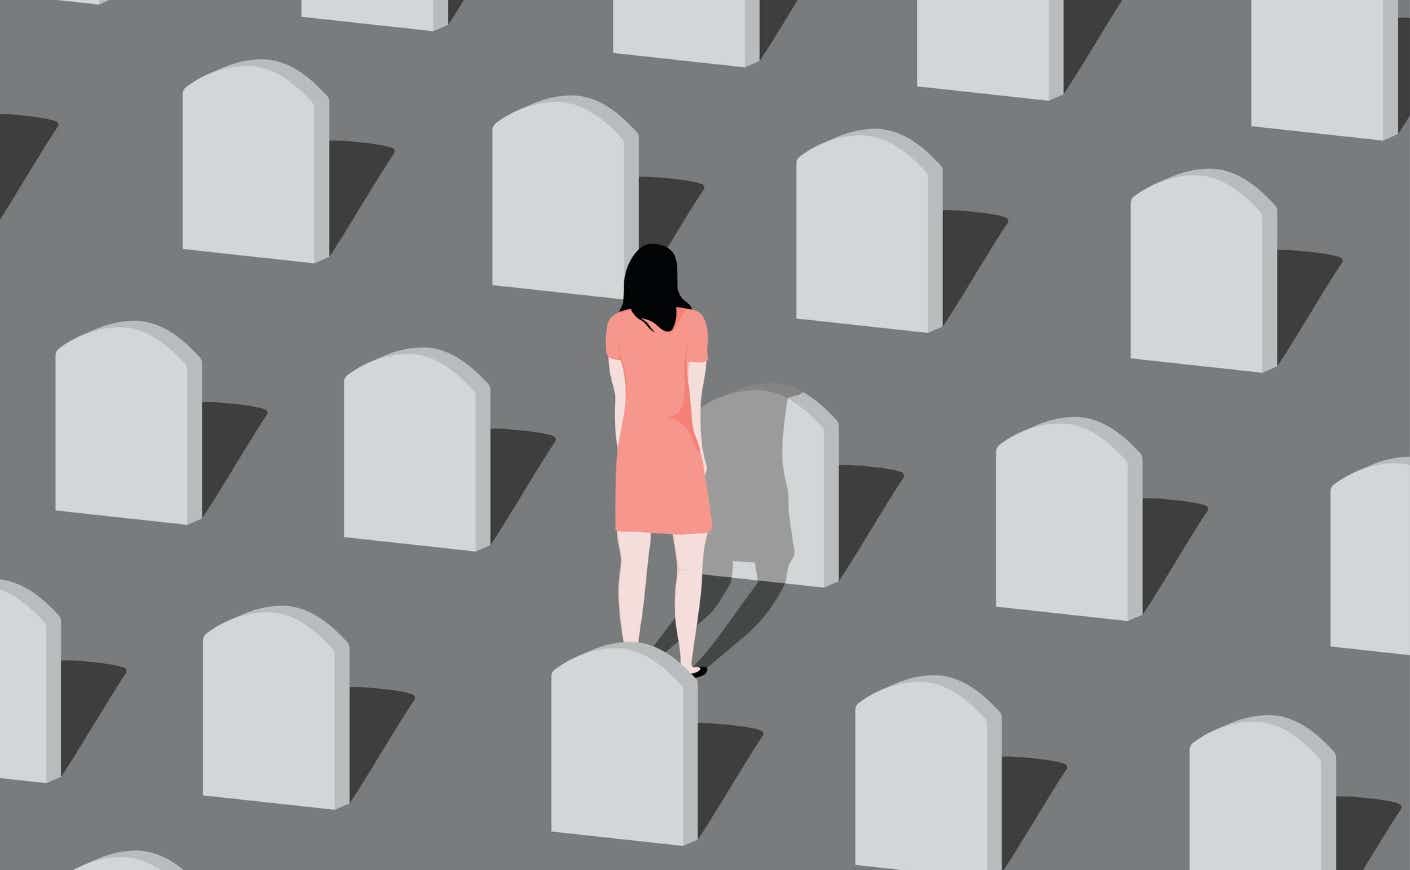 Illustration of a woman in a graveyard